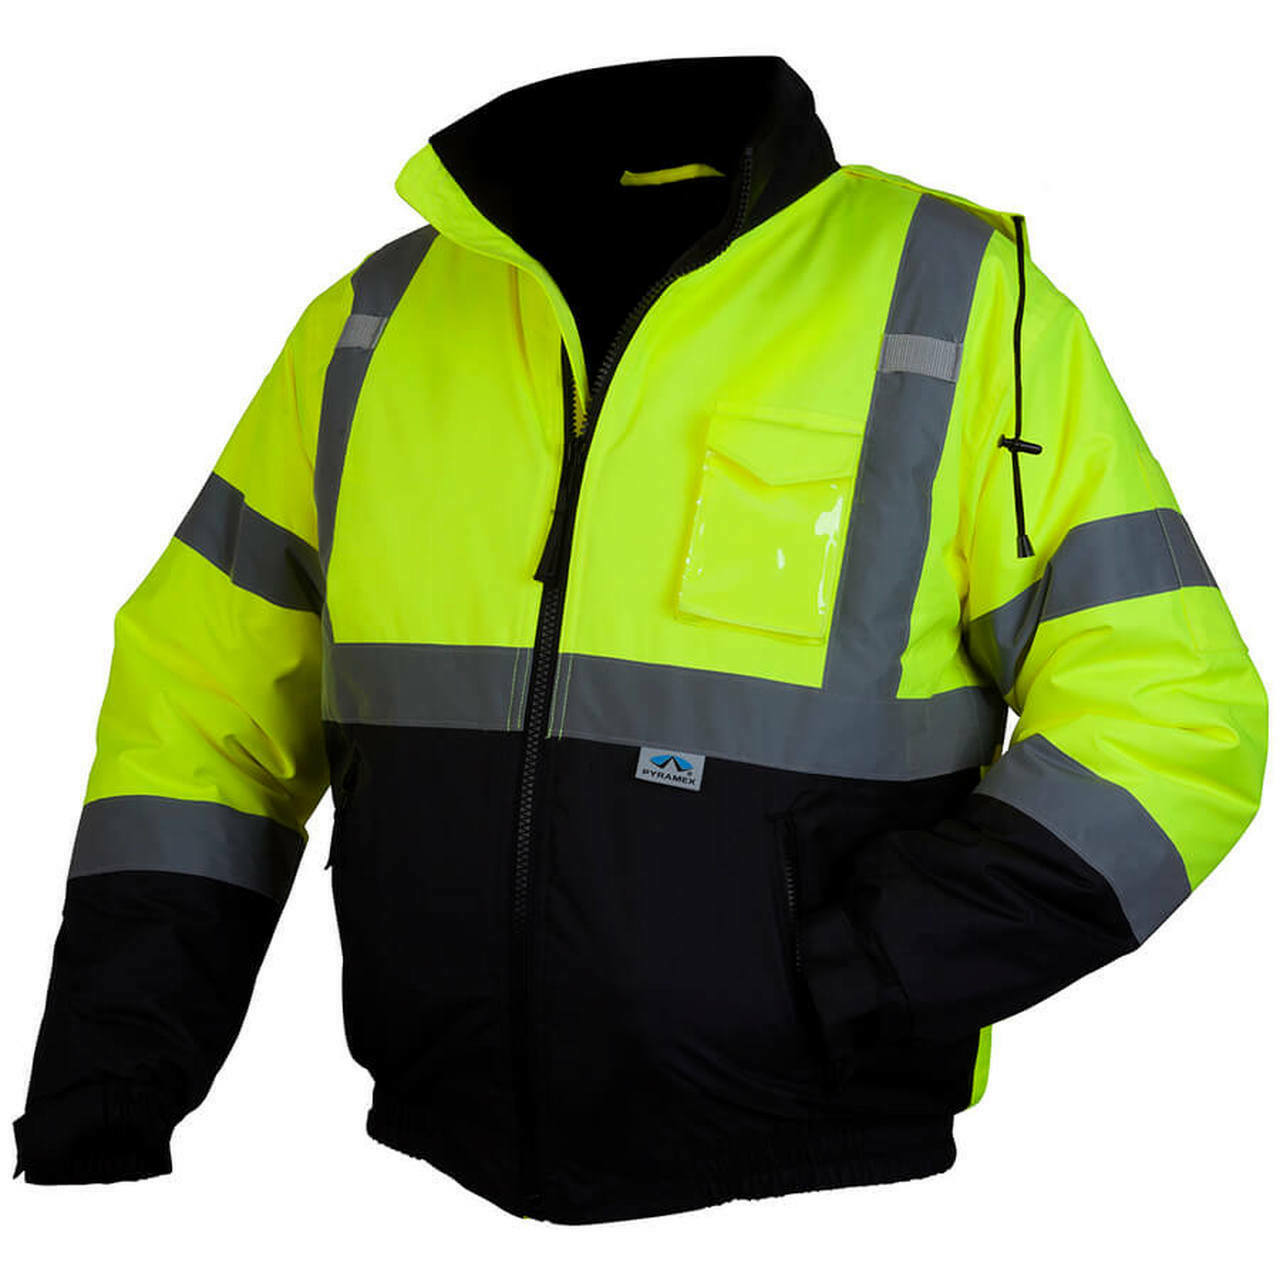 Pyramex Hi-vis Class 3 Insulated Safety Bomber Reflective Jacket Road Work